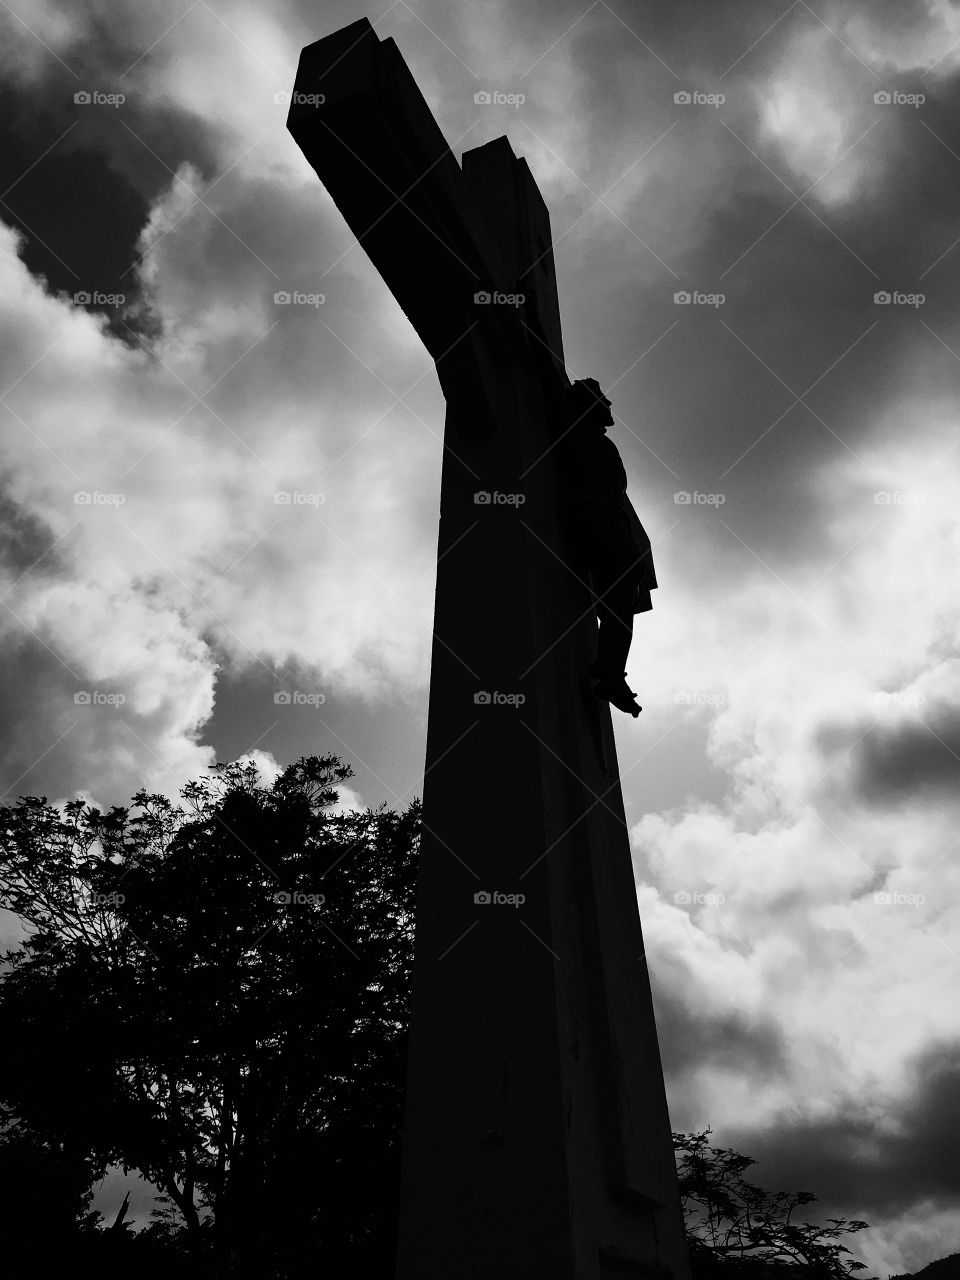 Silhouette Of A Cross In The Sky, Silhouette Of Religious Figure, Shadows Of Religion, Jesus On The Cross, Holy Cross In The Sky, Religious Morning, Outline Of Jesus, Silhouette Of Jesus 